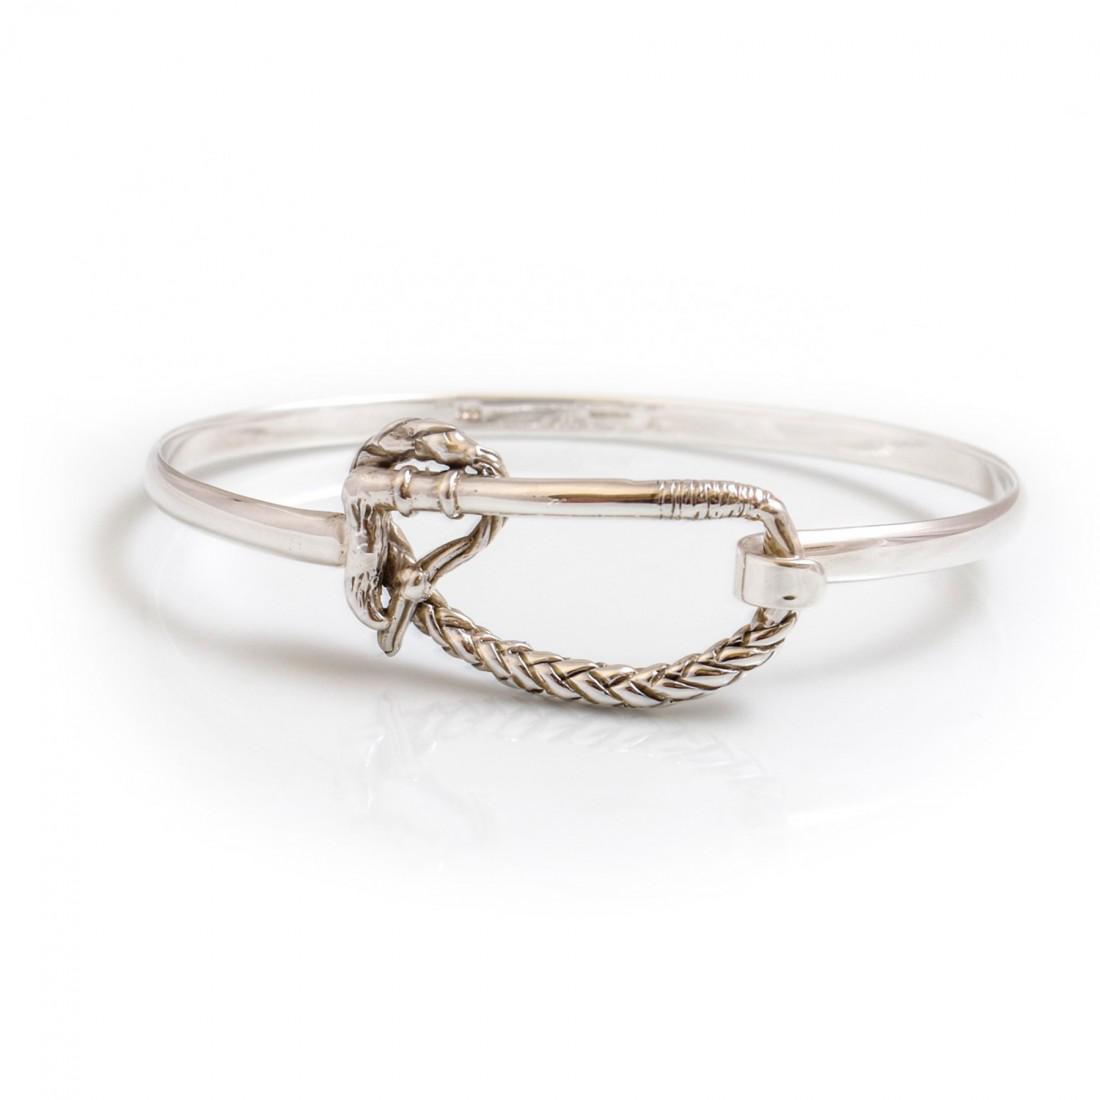 Exclusive Sterling Silver Riding Whip Bangle